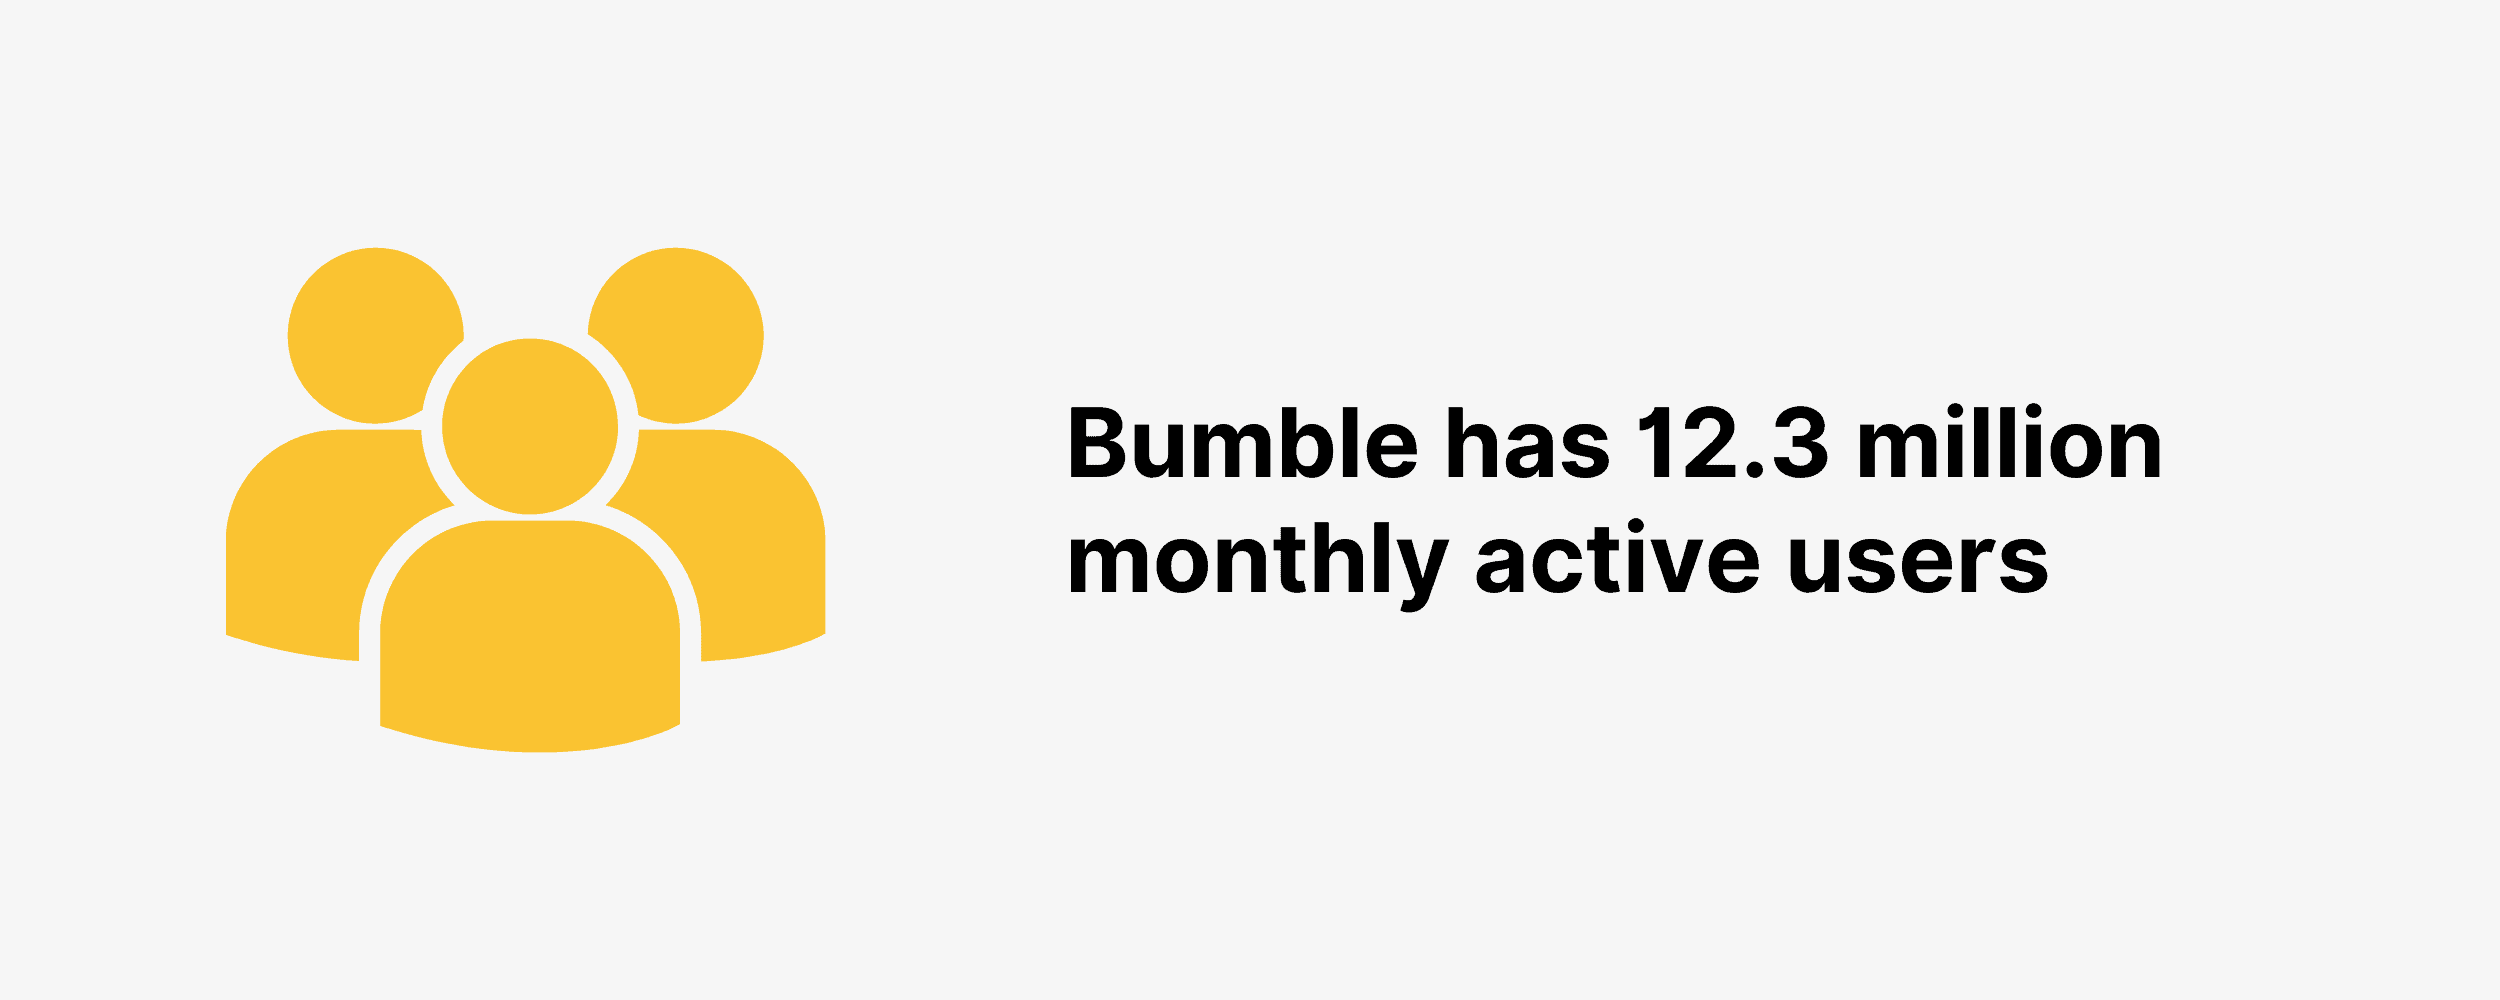 Bumble has 12.3 million monthly active users